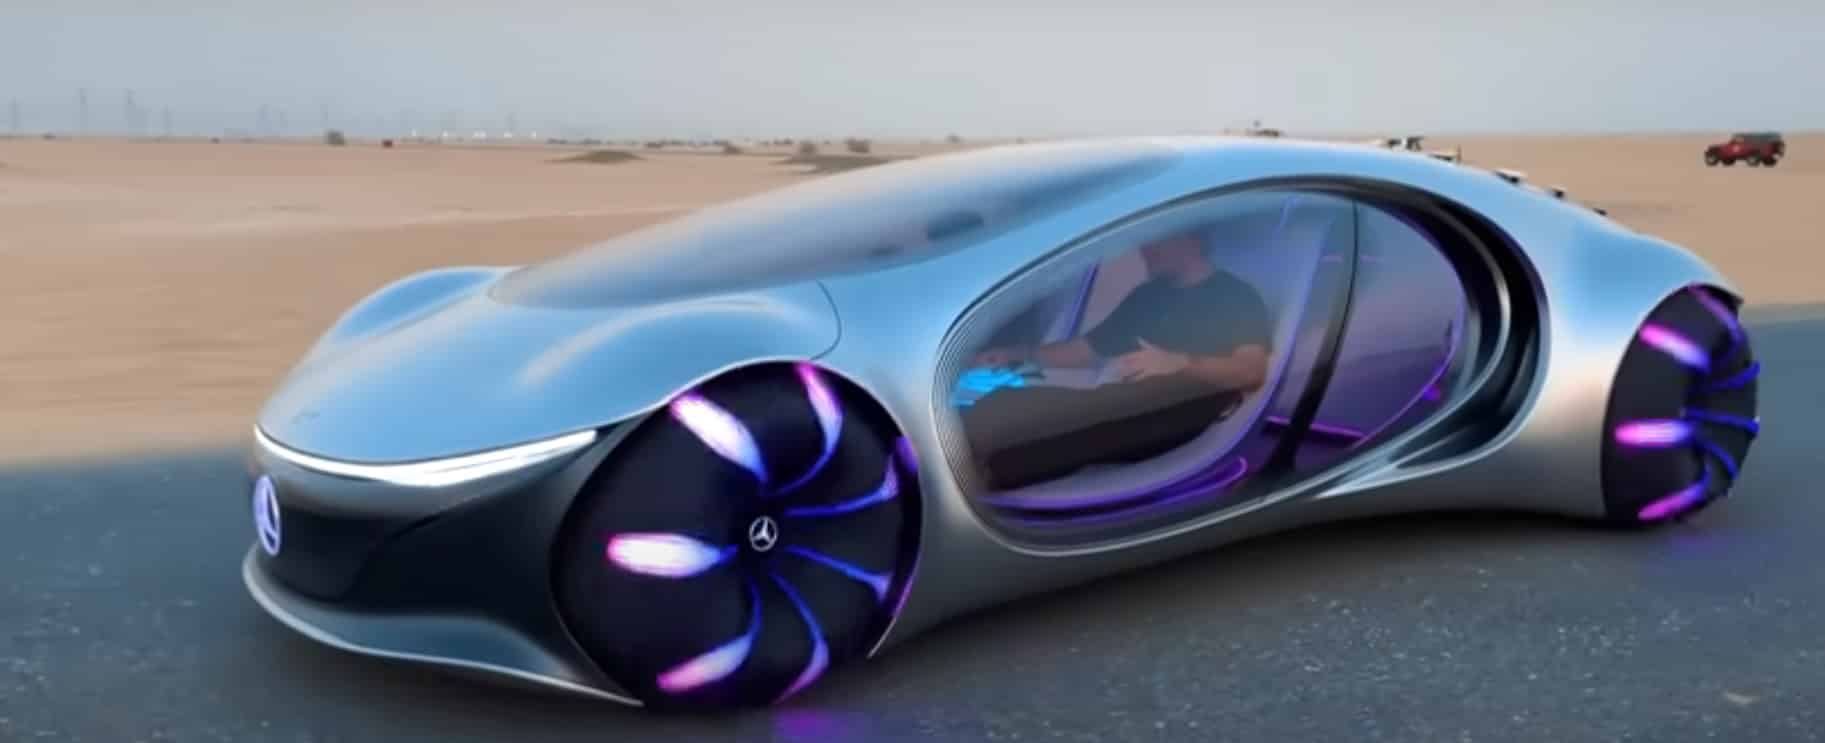 mercedes-avtr-concept-car-has-the-coolest-steering-of-any-car-ever